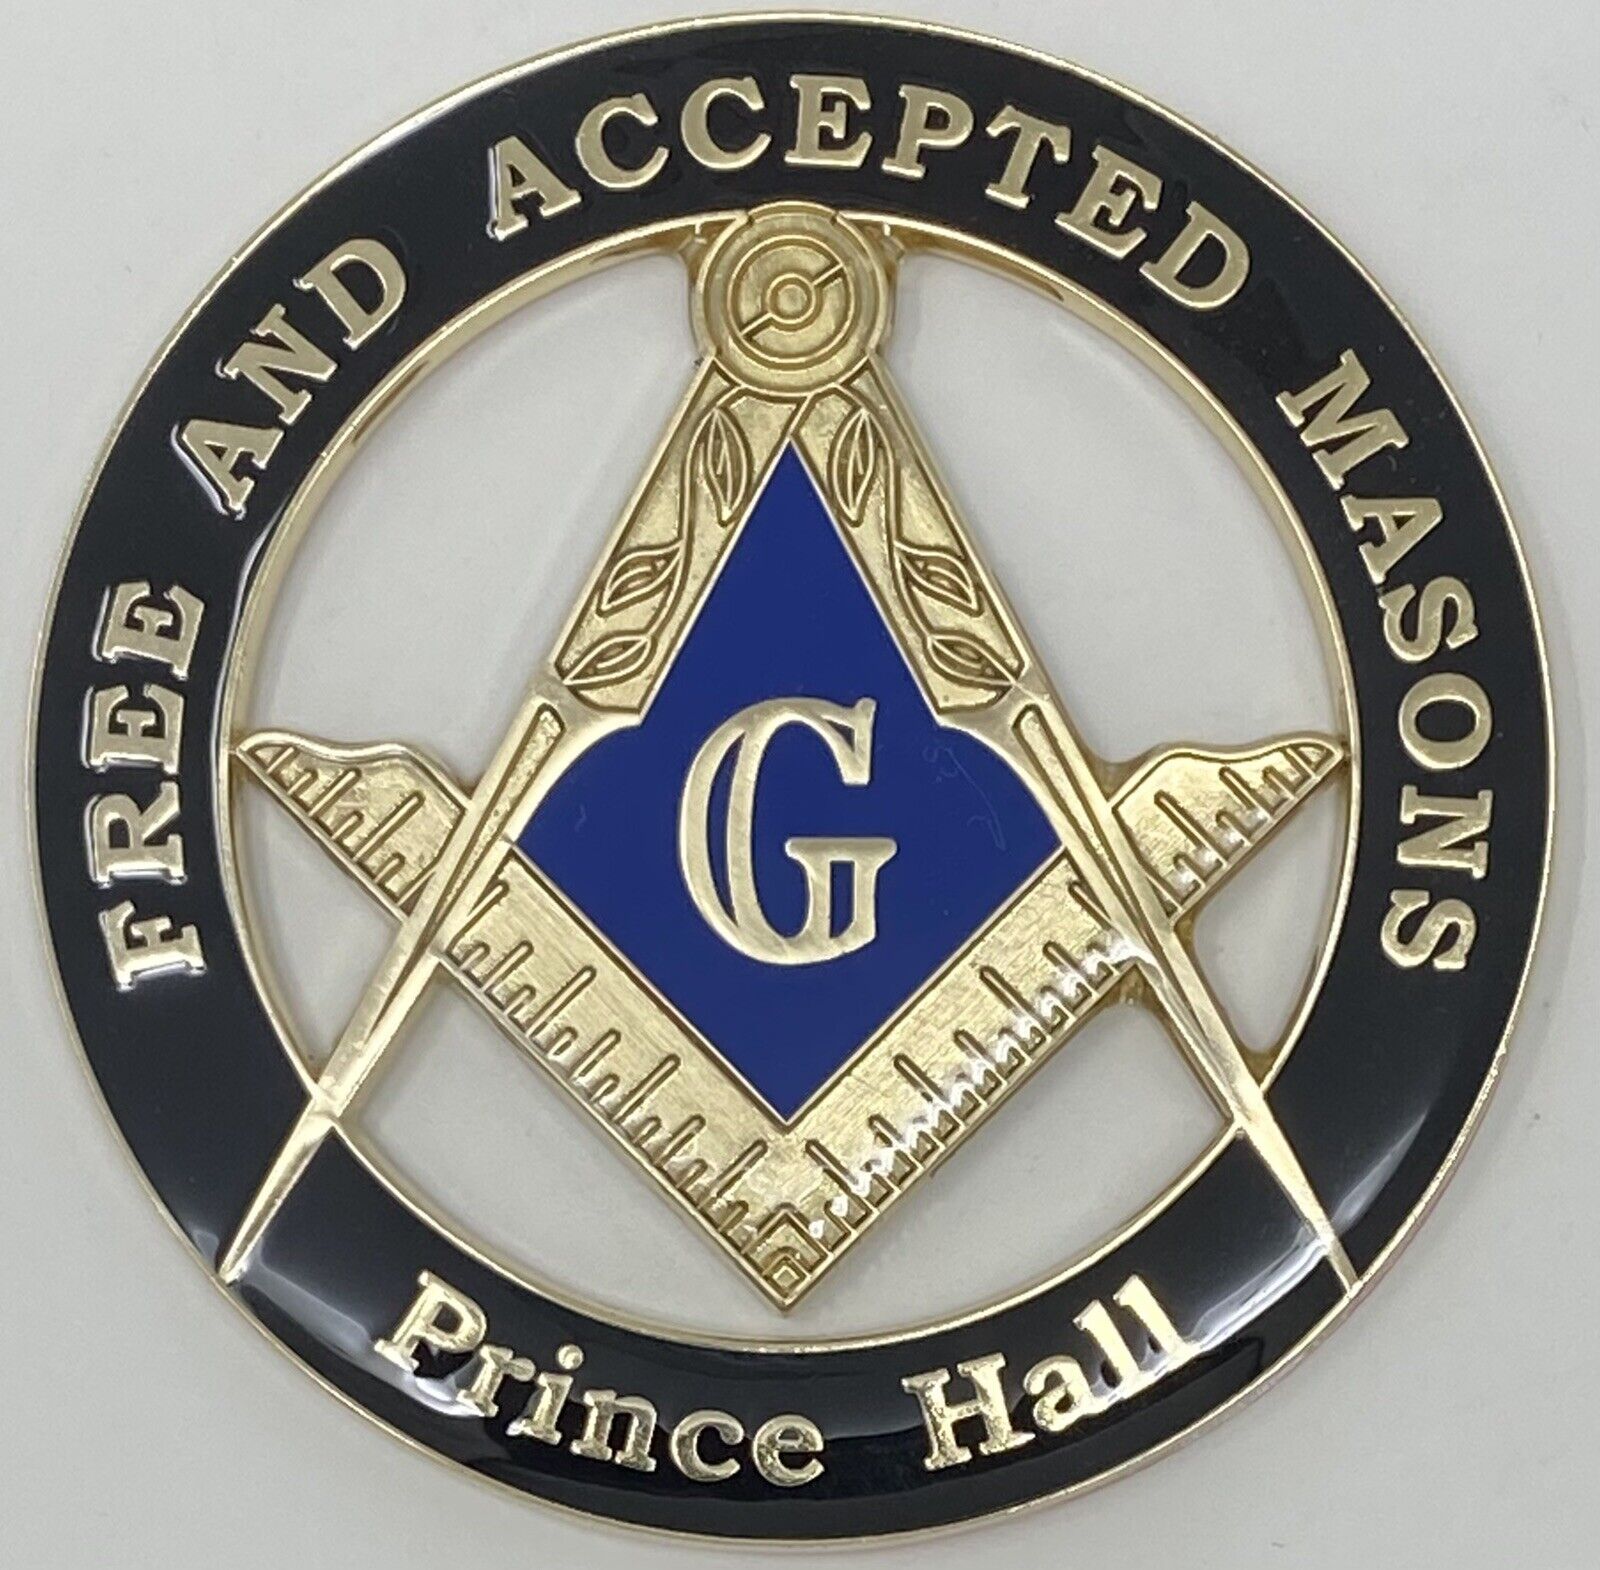 New Prince Hall Affiliated Masonic Car Emblem in Black with Blue